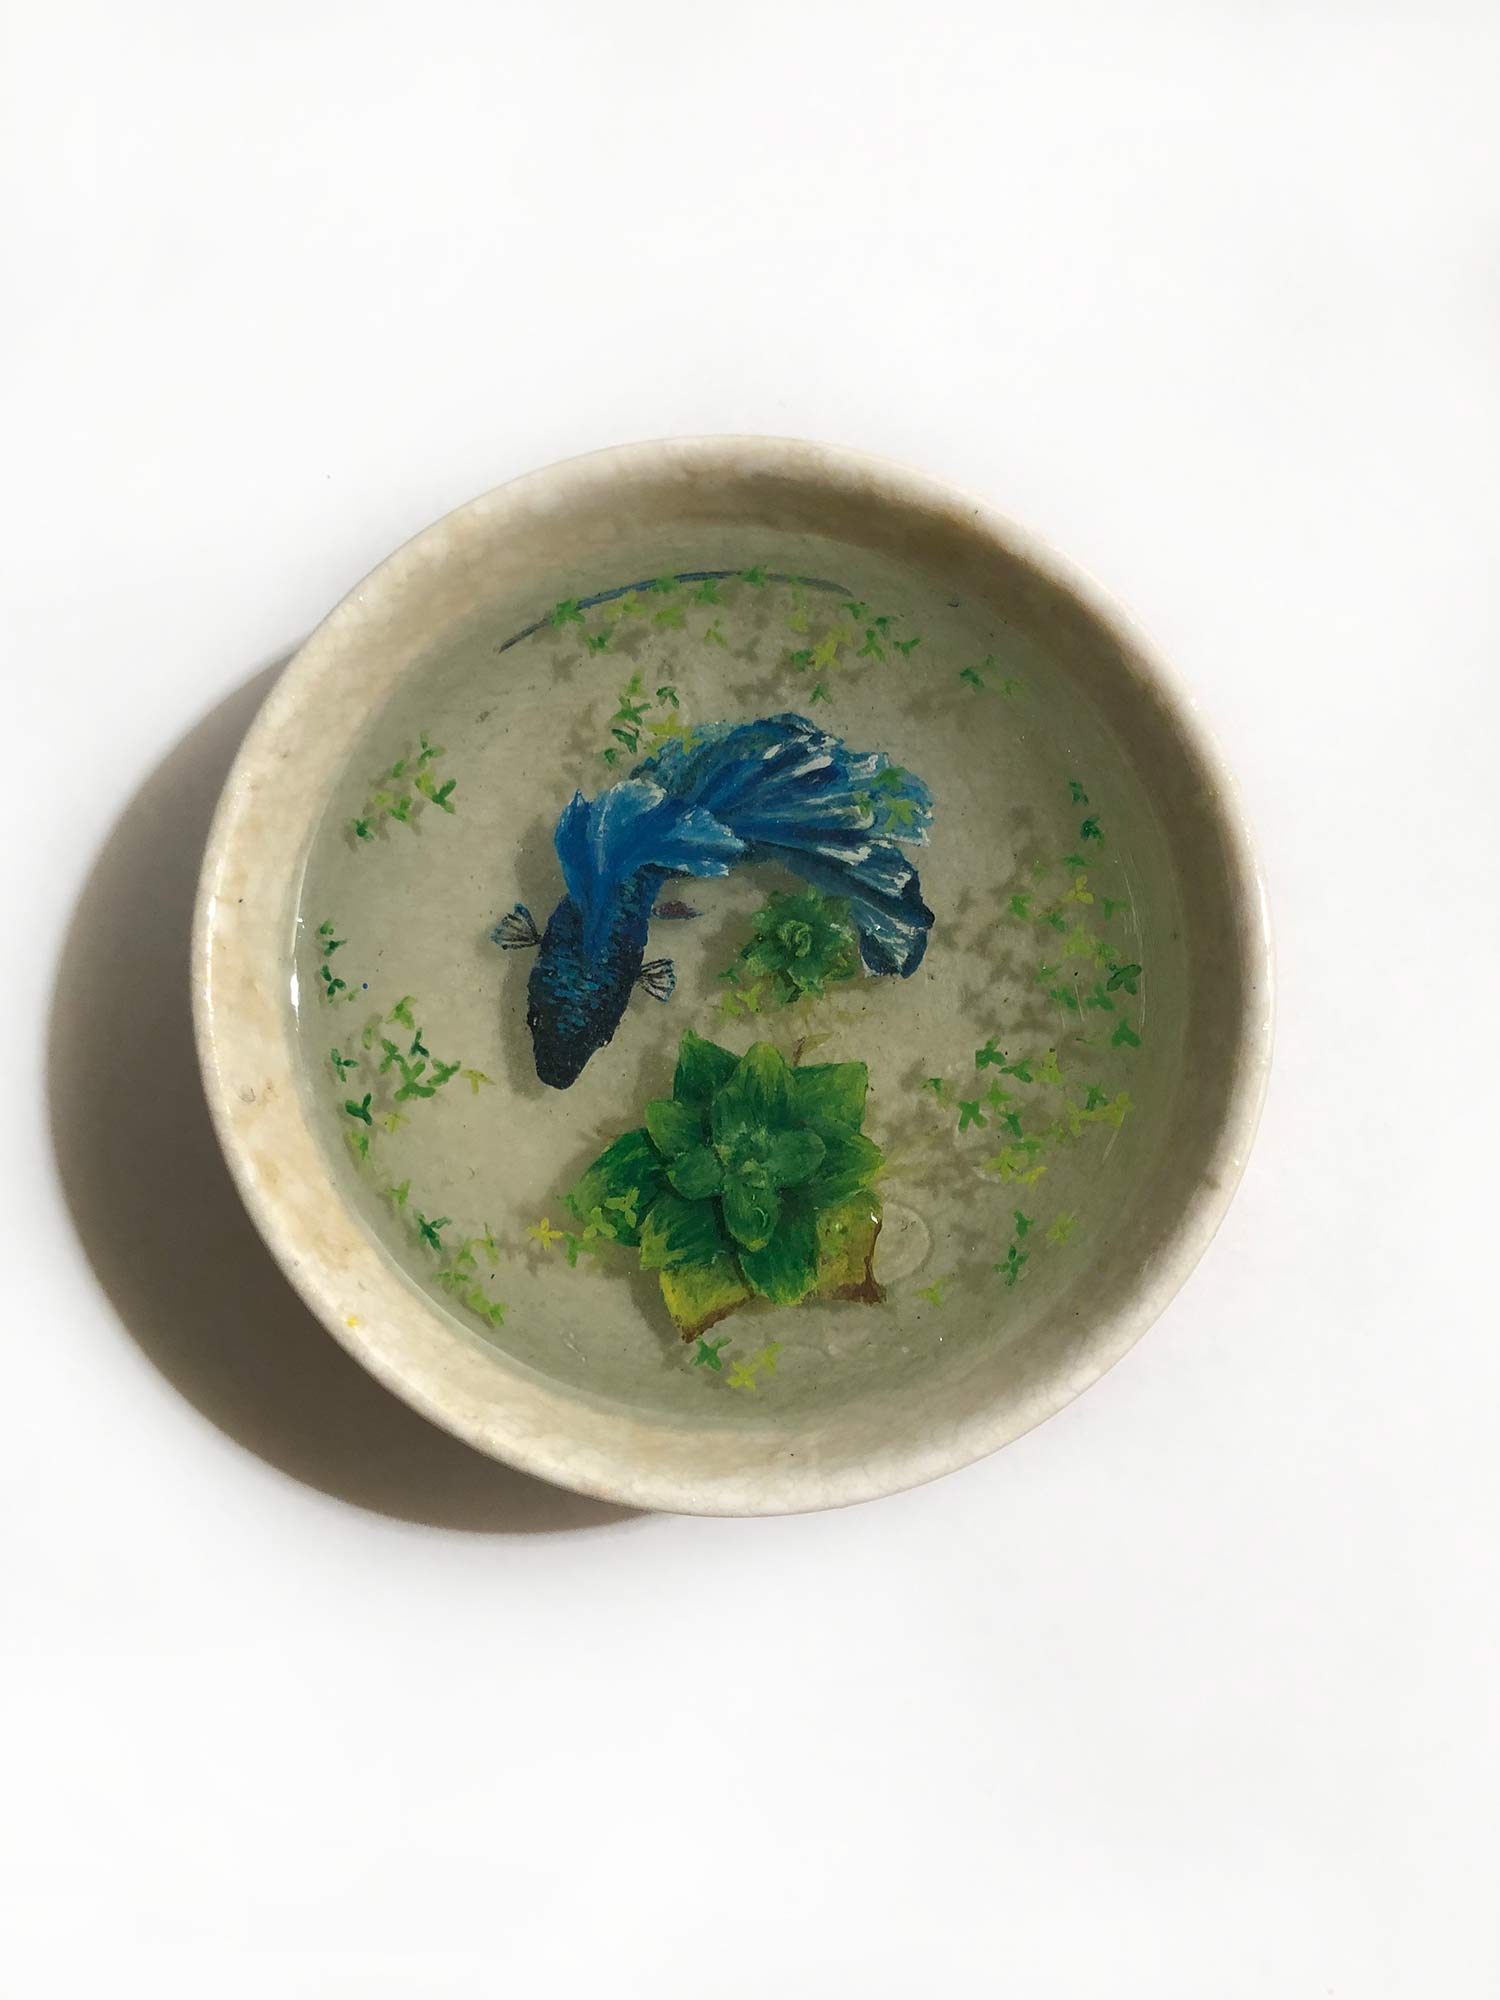 A blue fish swimming in a bowl